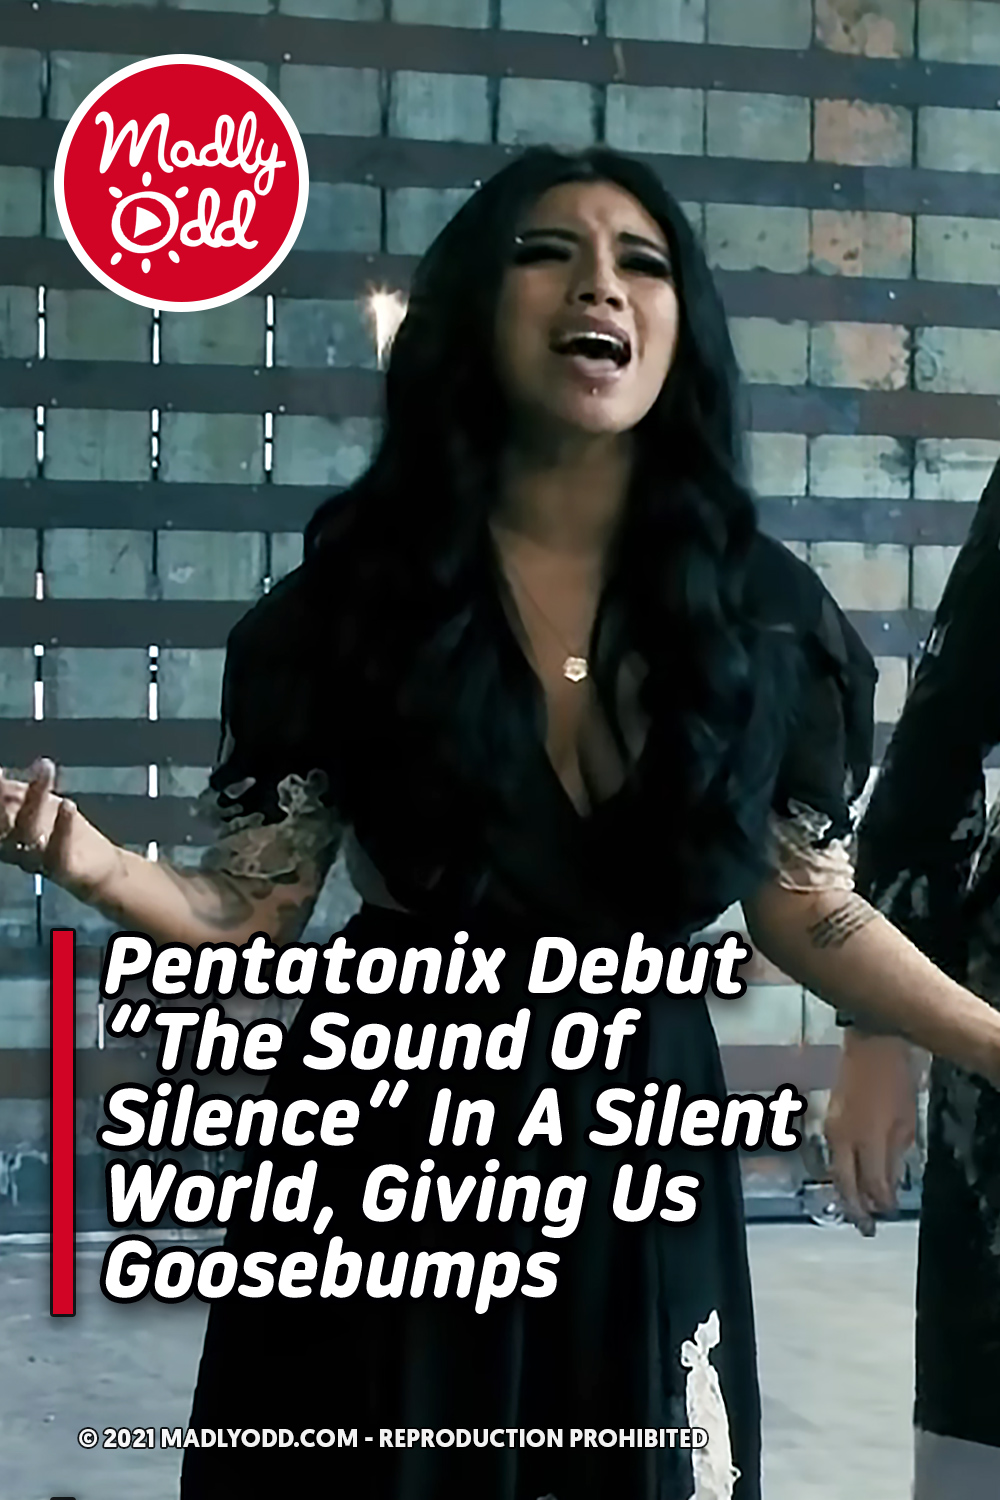 Pentatonix Debut “The Sound Of Silence” In A Silent World, Giving Us Goosebumps